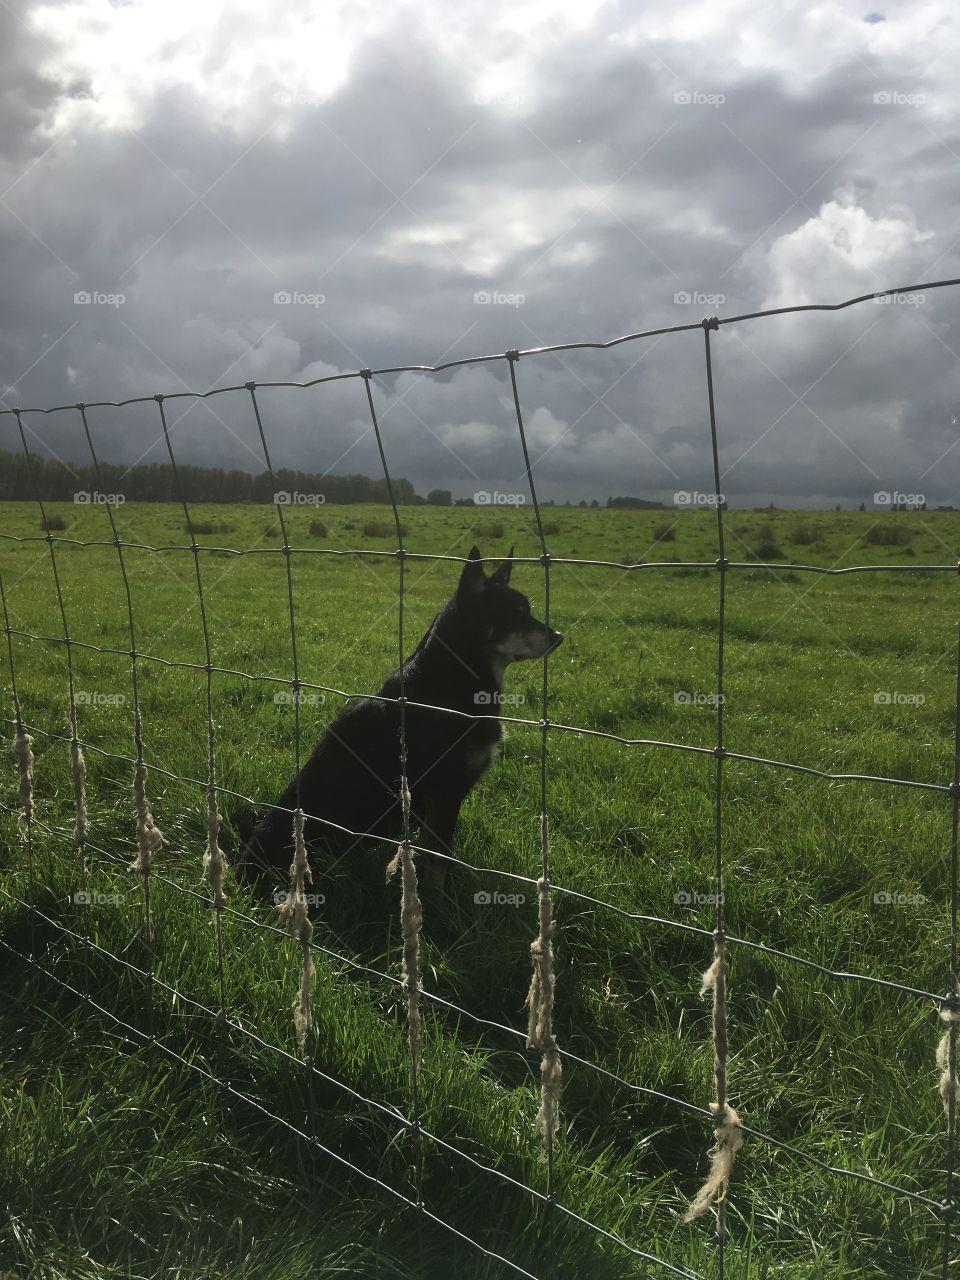 The sky and the dog portray a menacing scene in this shot. A fence fronts the lovely kelpie dog, which is waiting commands from his shepherd. 